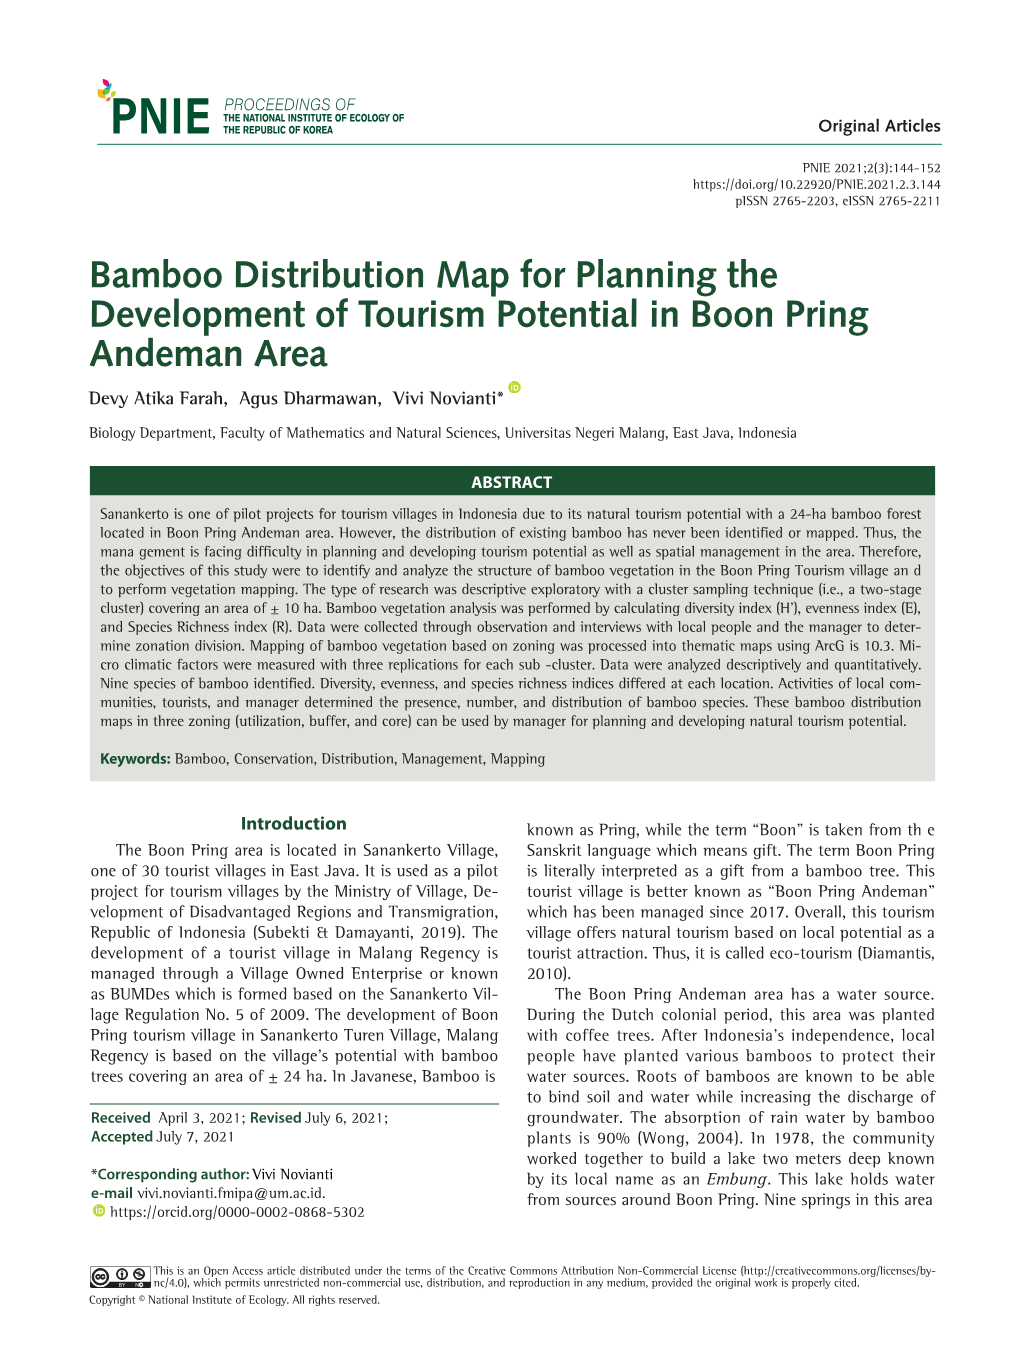 Bamboo Distribution Map for Planning the Development of Tourism Potential in Boon Pring Andeman Area Devy Atika Farah, Agus Dharmawan, Vivi Novianti*